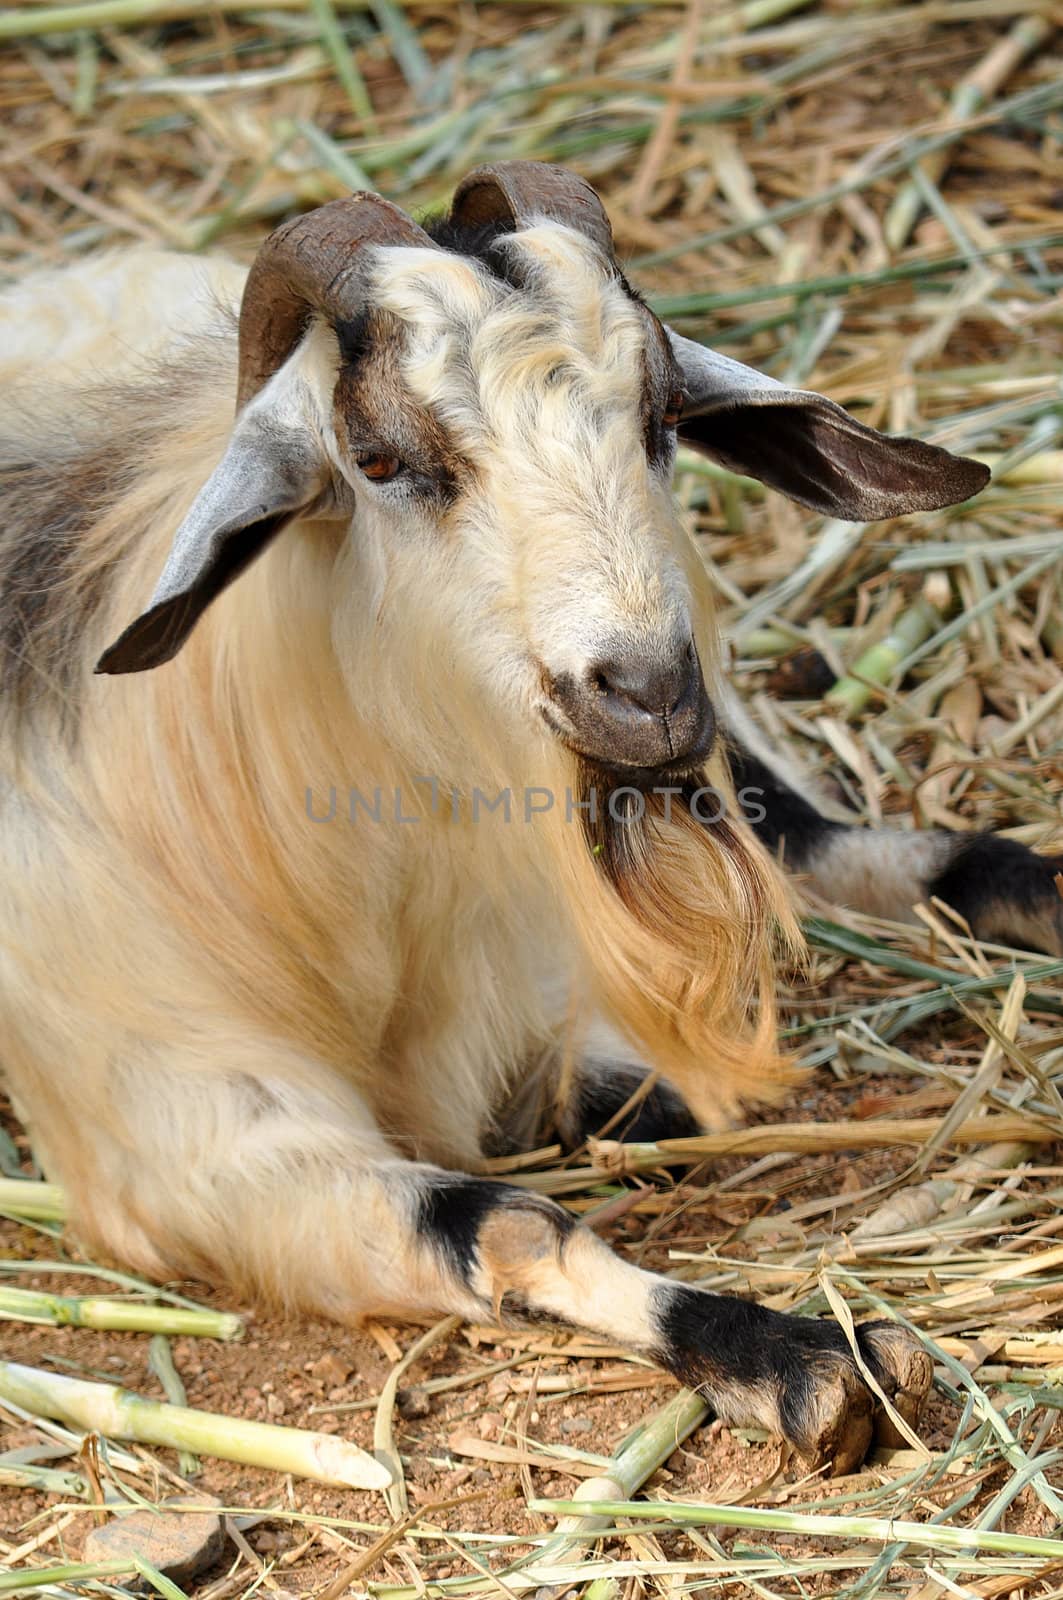 Goats are one of the oldest domesticated species. Goats have been used for their milk, meat, hair, and skins over much of the world.